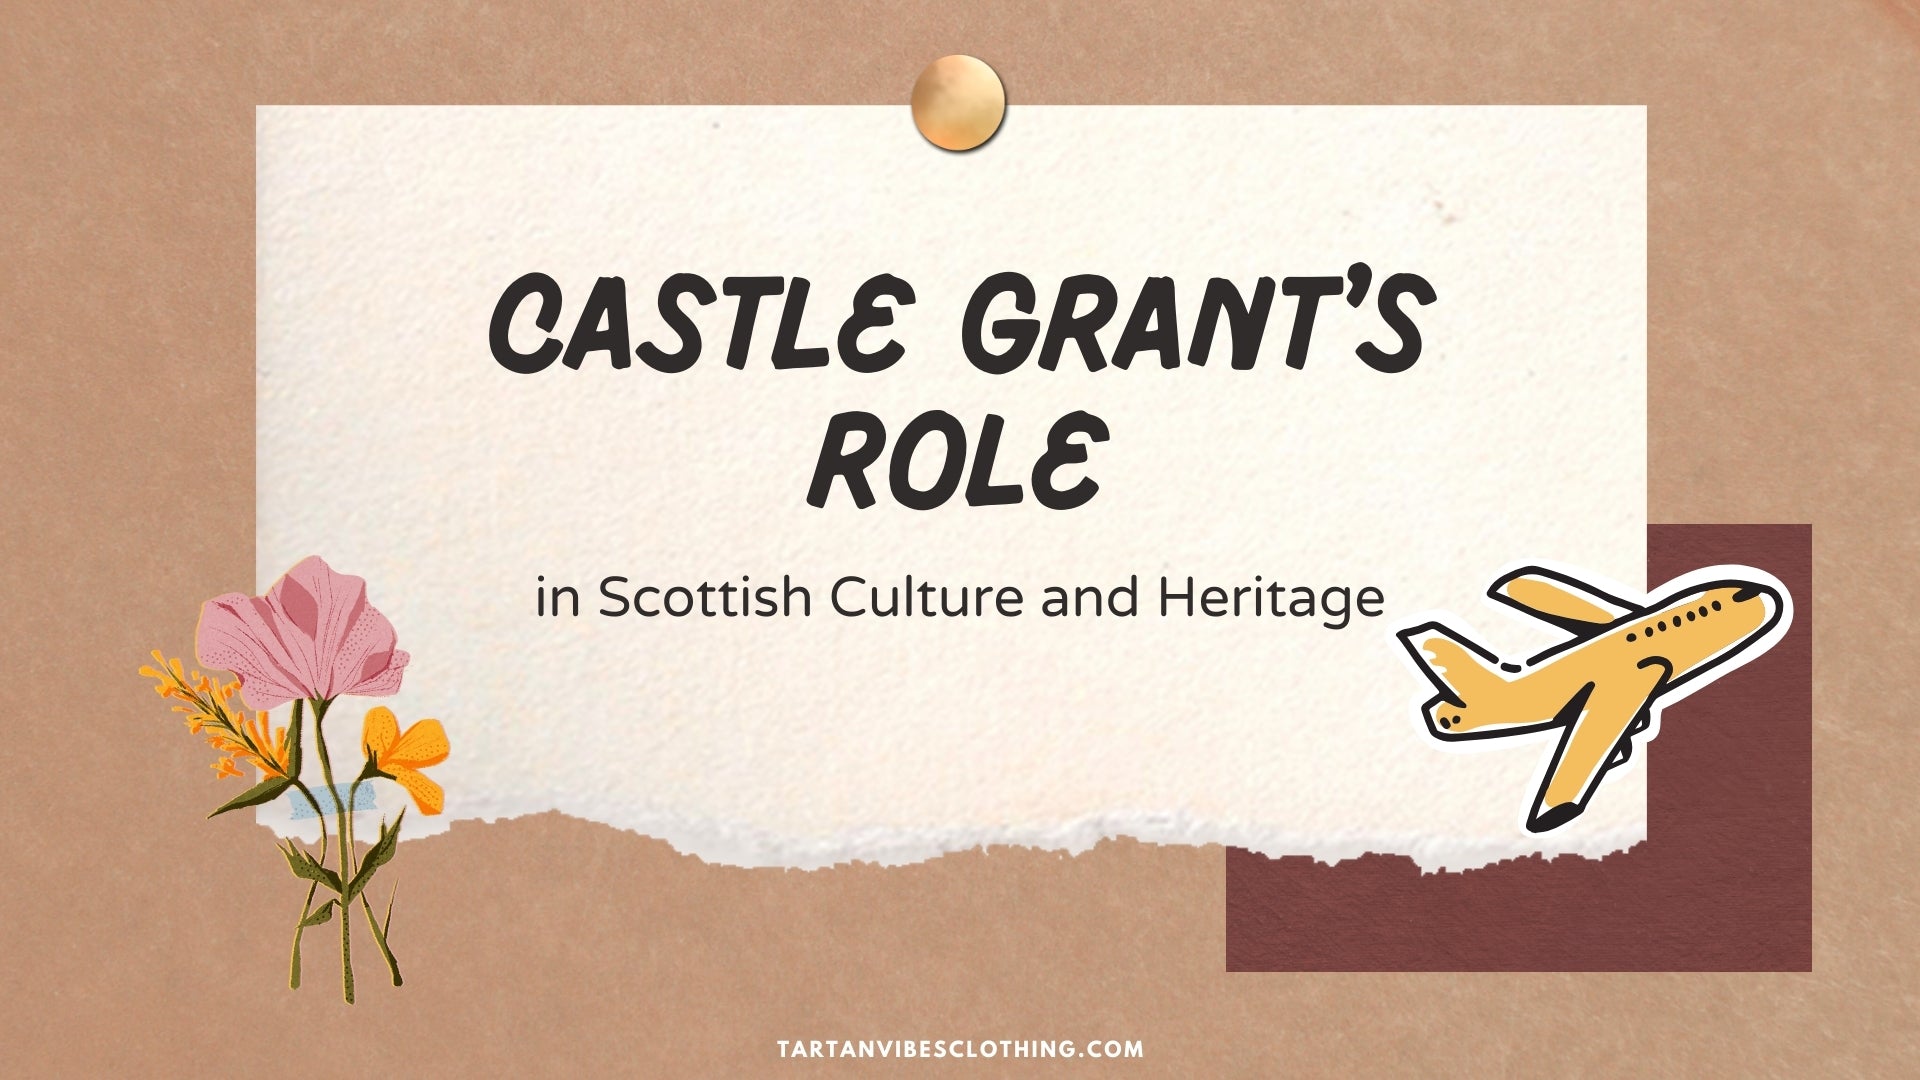 Castle Grant's Role in Scottish Culture and Heritage